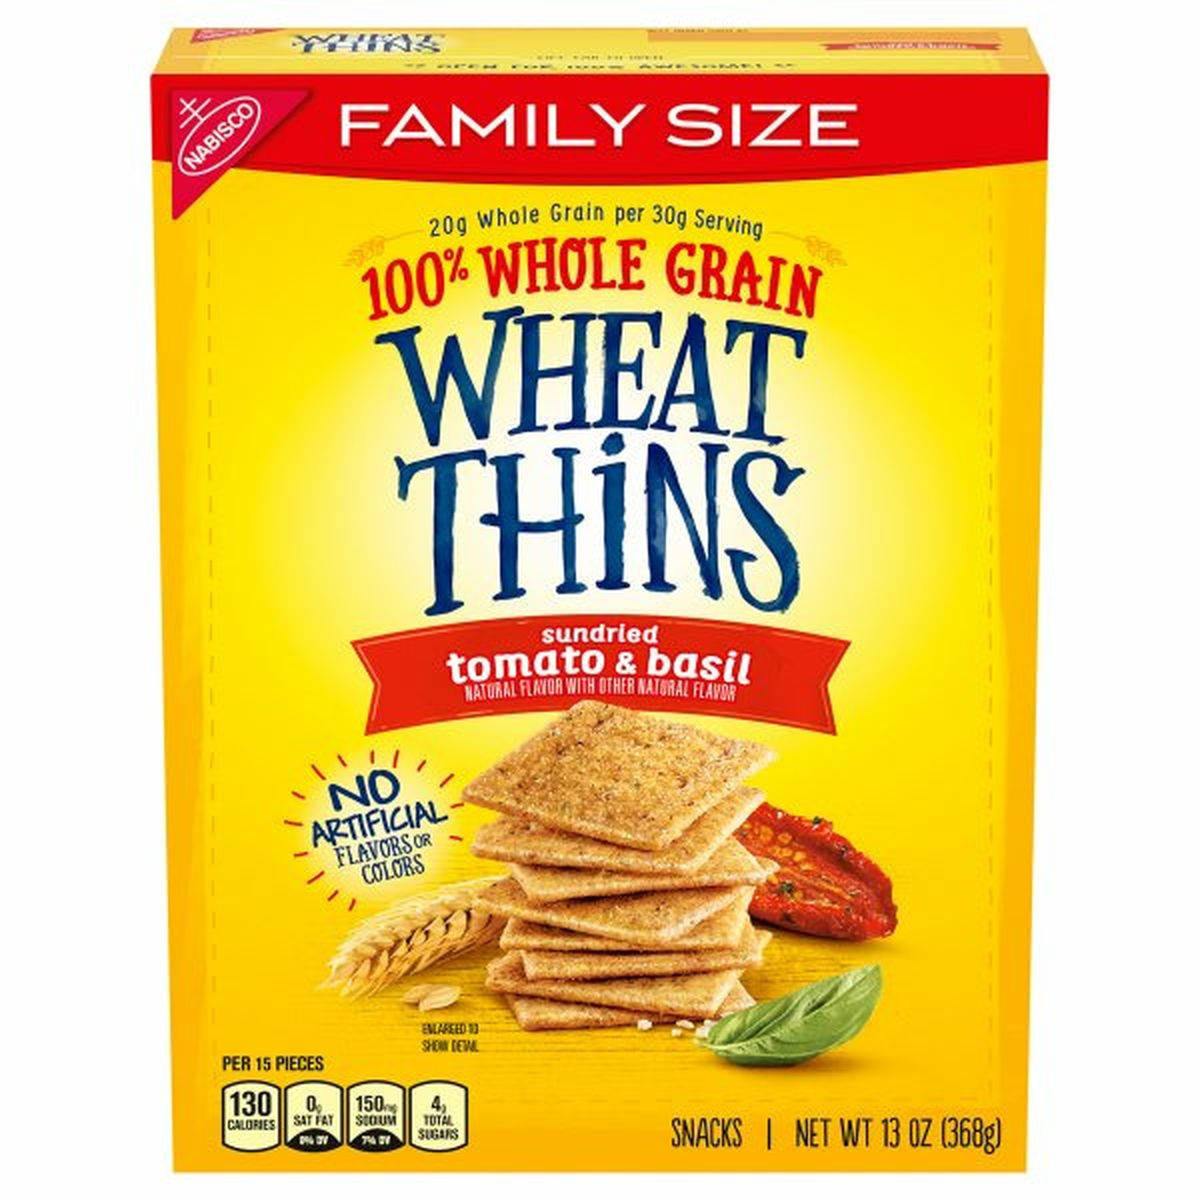 Calories in Wheat Thins Snacks, Sundried Tomato & Basil, Family Size